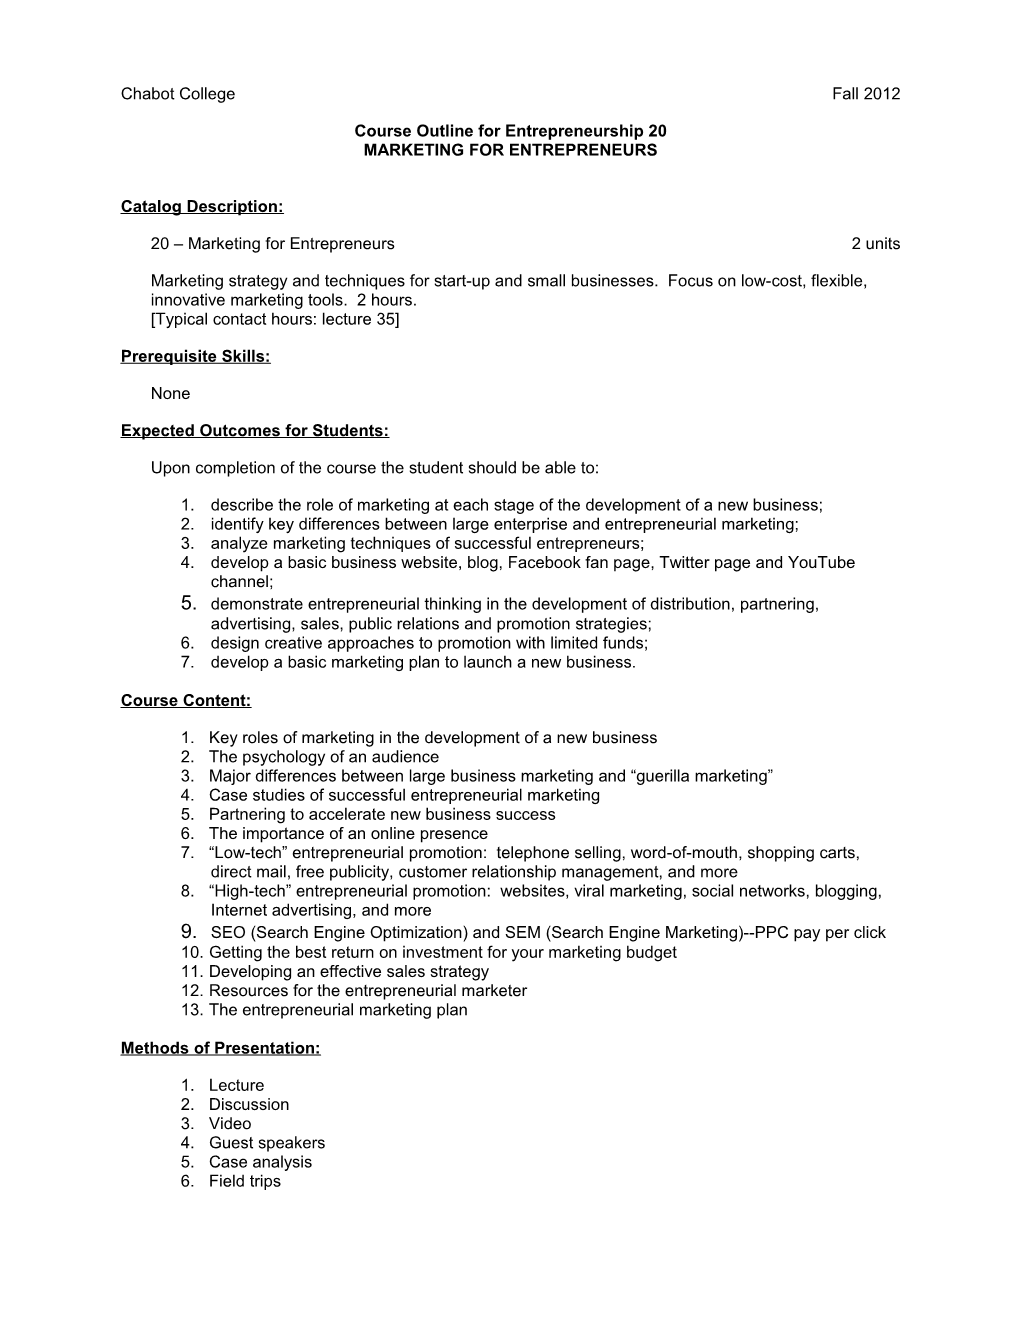 Course Outline for Entrepreneurship 20, Page 2